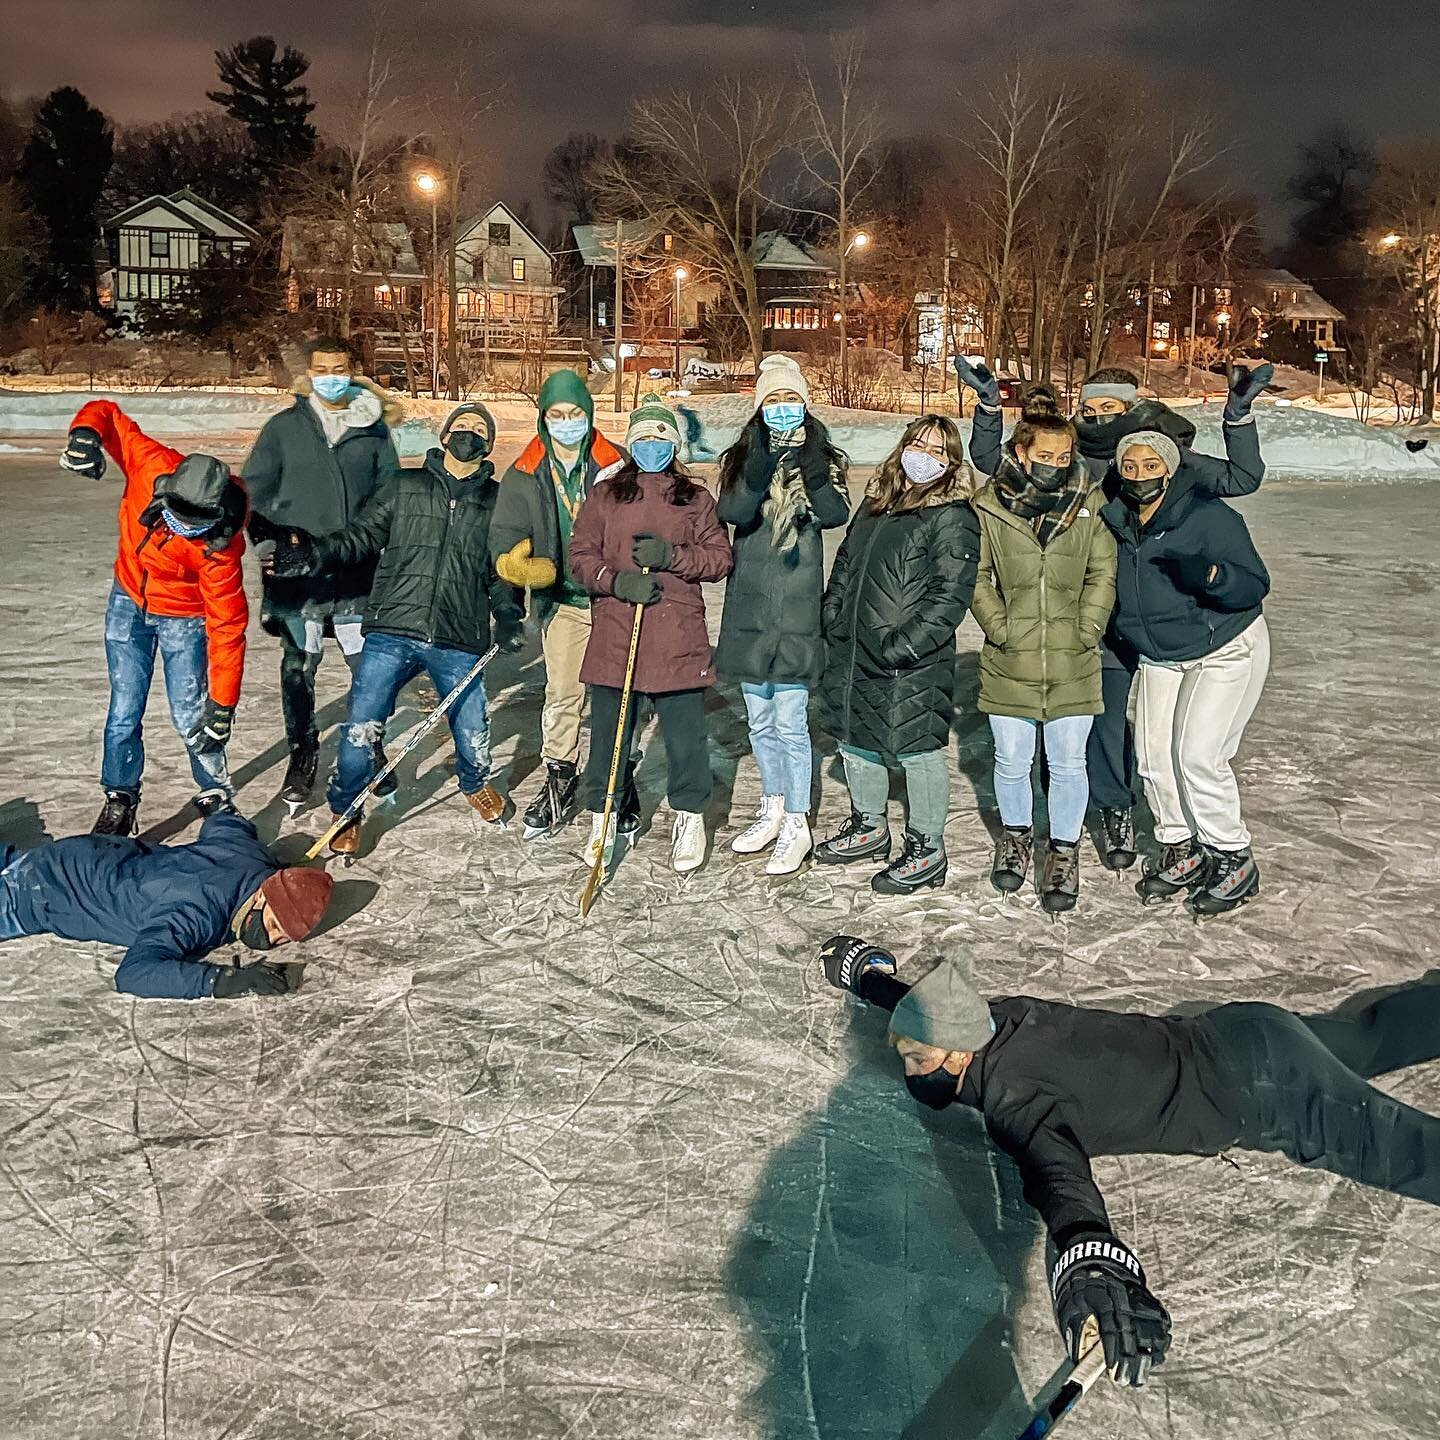 📸 Iceskating pics!! We had so much fun last Friday! ⛸❄️🥶 Even in the cold Badgers know how to have a good time 😎

#badgers #iceskating #uwmadison #ministry #fellowship #hockey